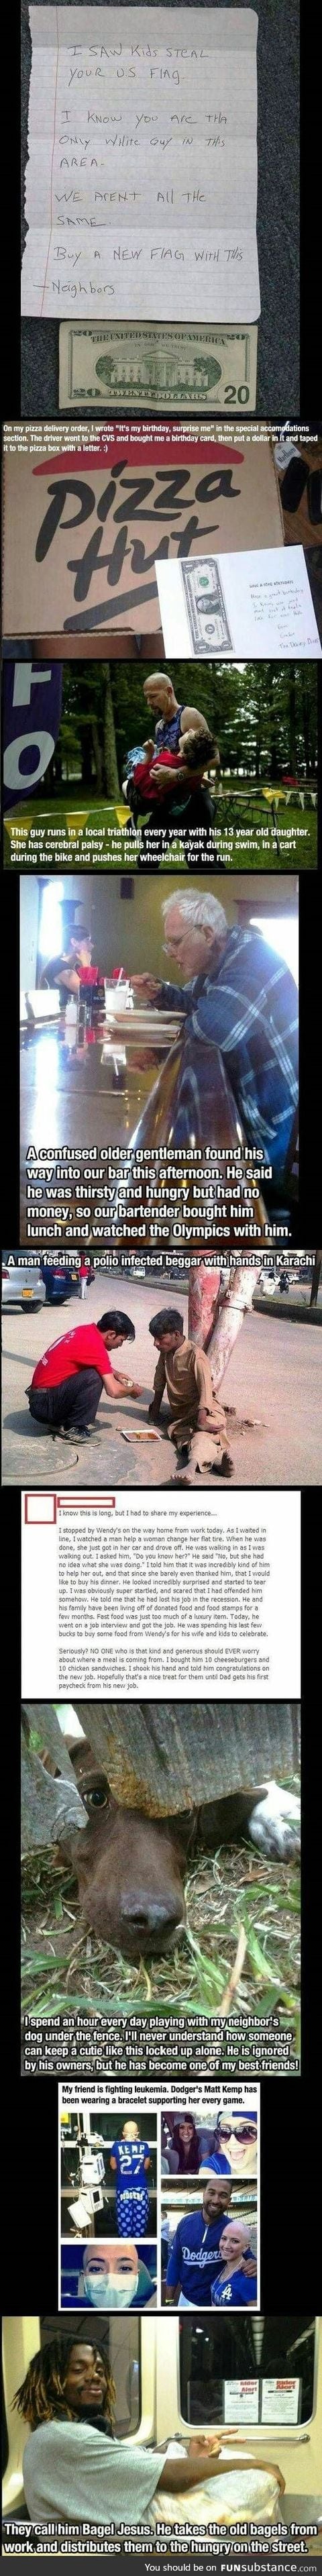 Random acts of kindness